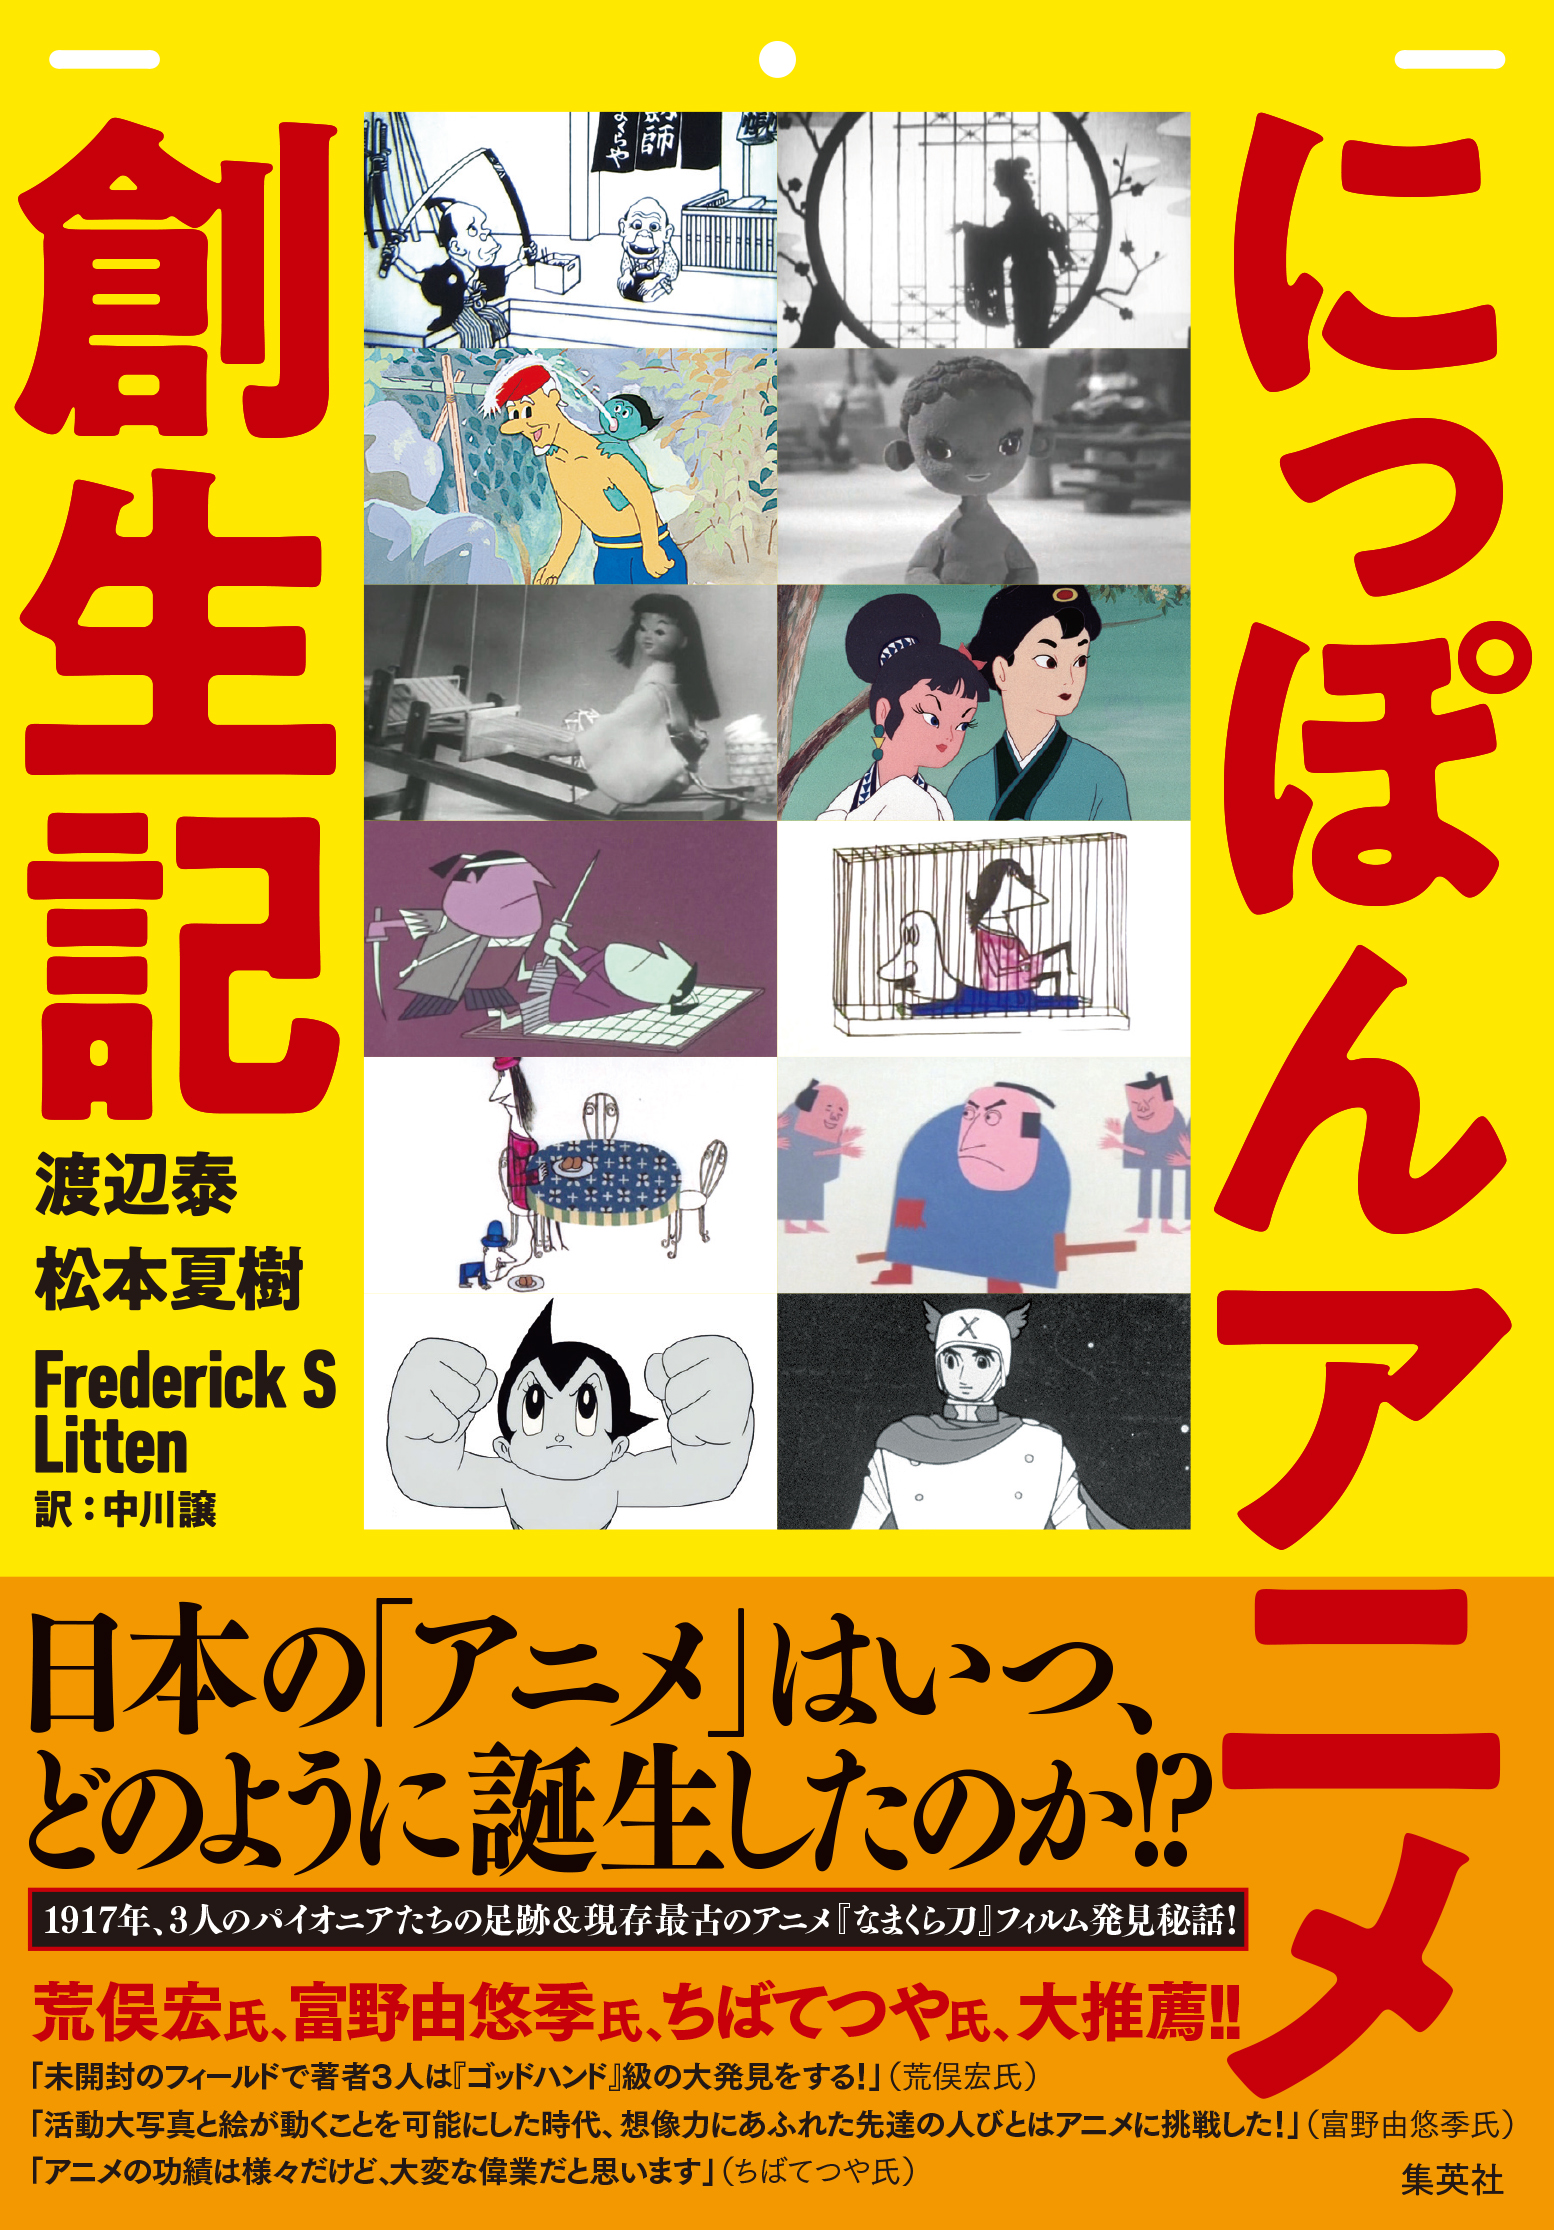 Cover Animated Film in Japan until 1919